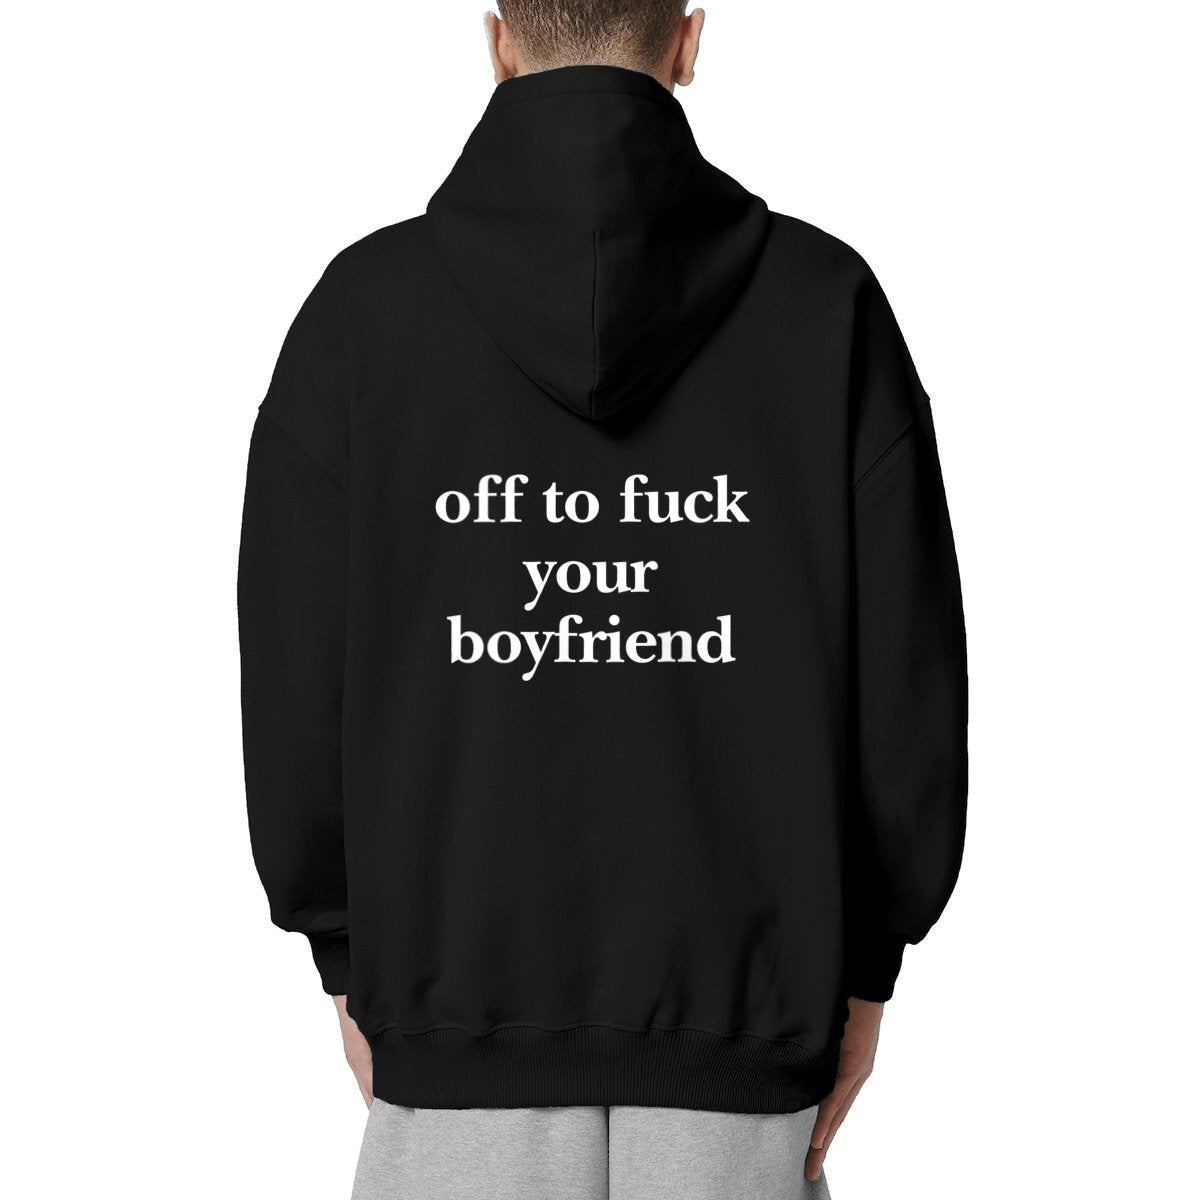 off to fuck YOUR BOYFRIEND hoodie oversized. garçon garçon essentiel oversized hoodie. Sleek in black and whispering Parisian chic, this hoodie is the sartorial whisper of 'garçon garçon' — a statement of understated elegance. Perfect for those who carry a piece of Paris in their hearts and a touch of audacity on their sleeves.